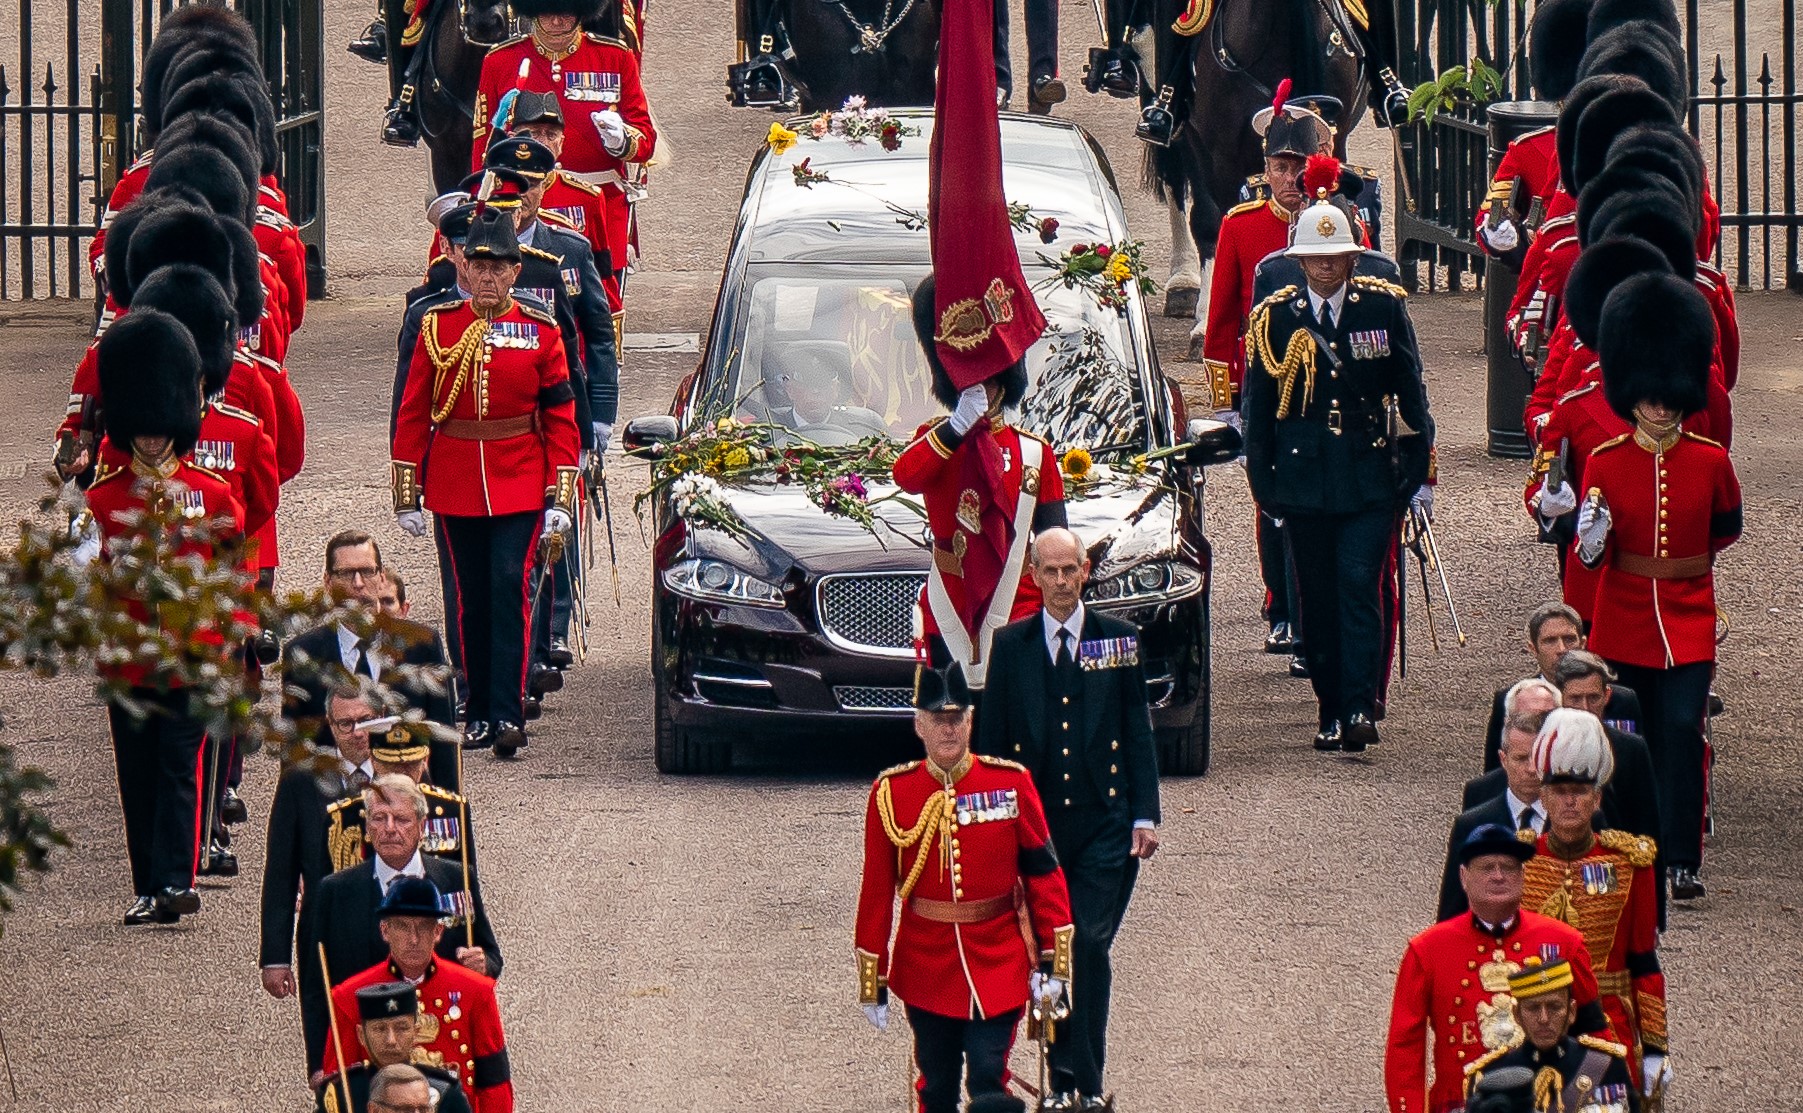 Paul Whybrew (centre) as the State Hearse carries the coffin of Queen Elizabeth II to Windsor Castle